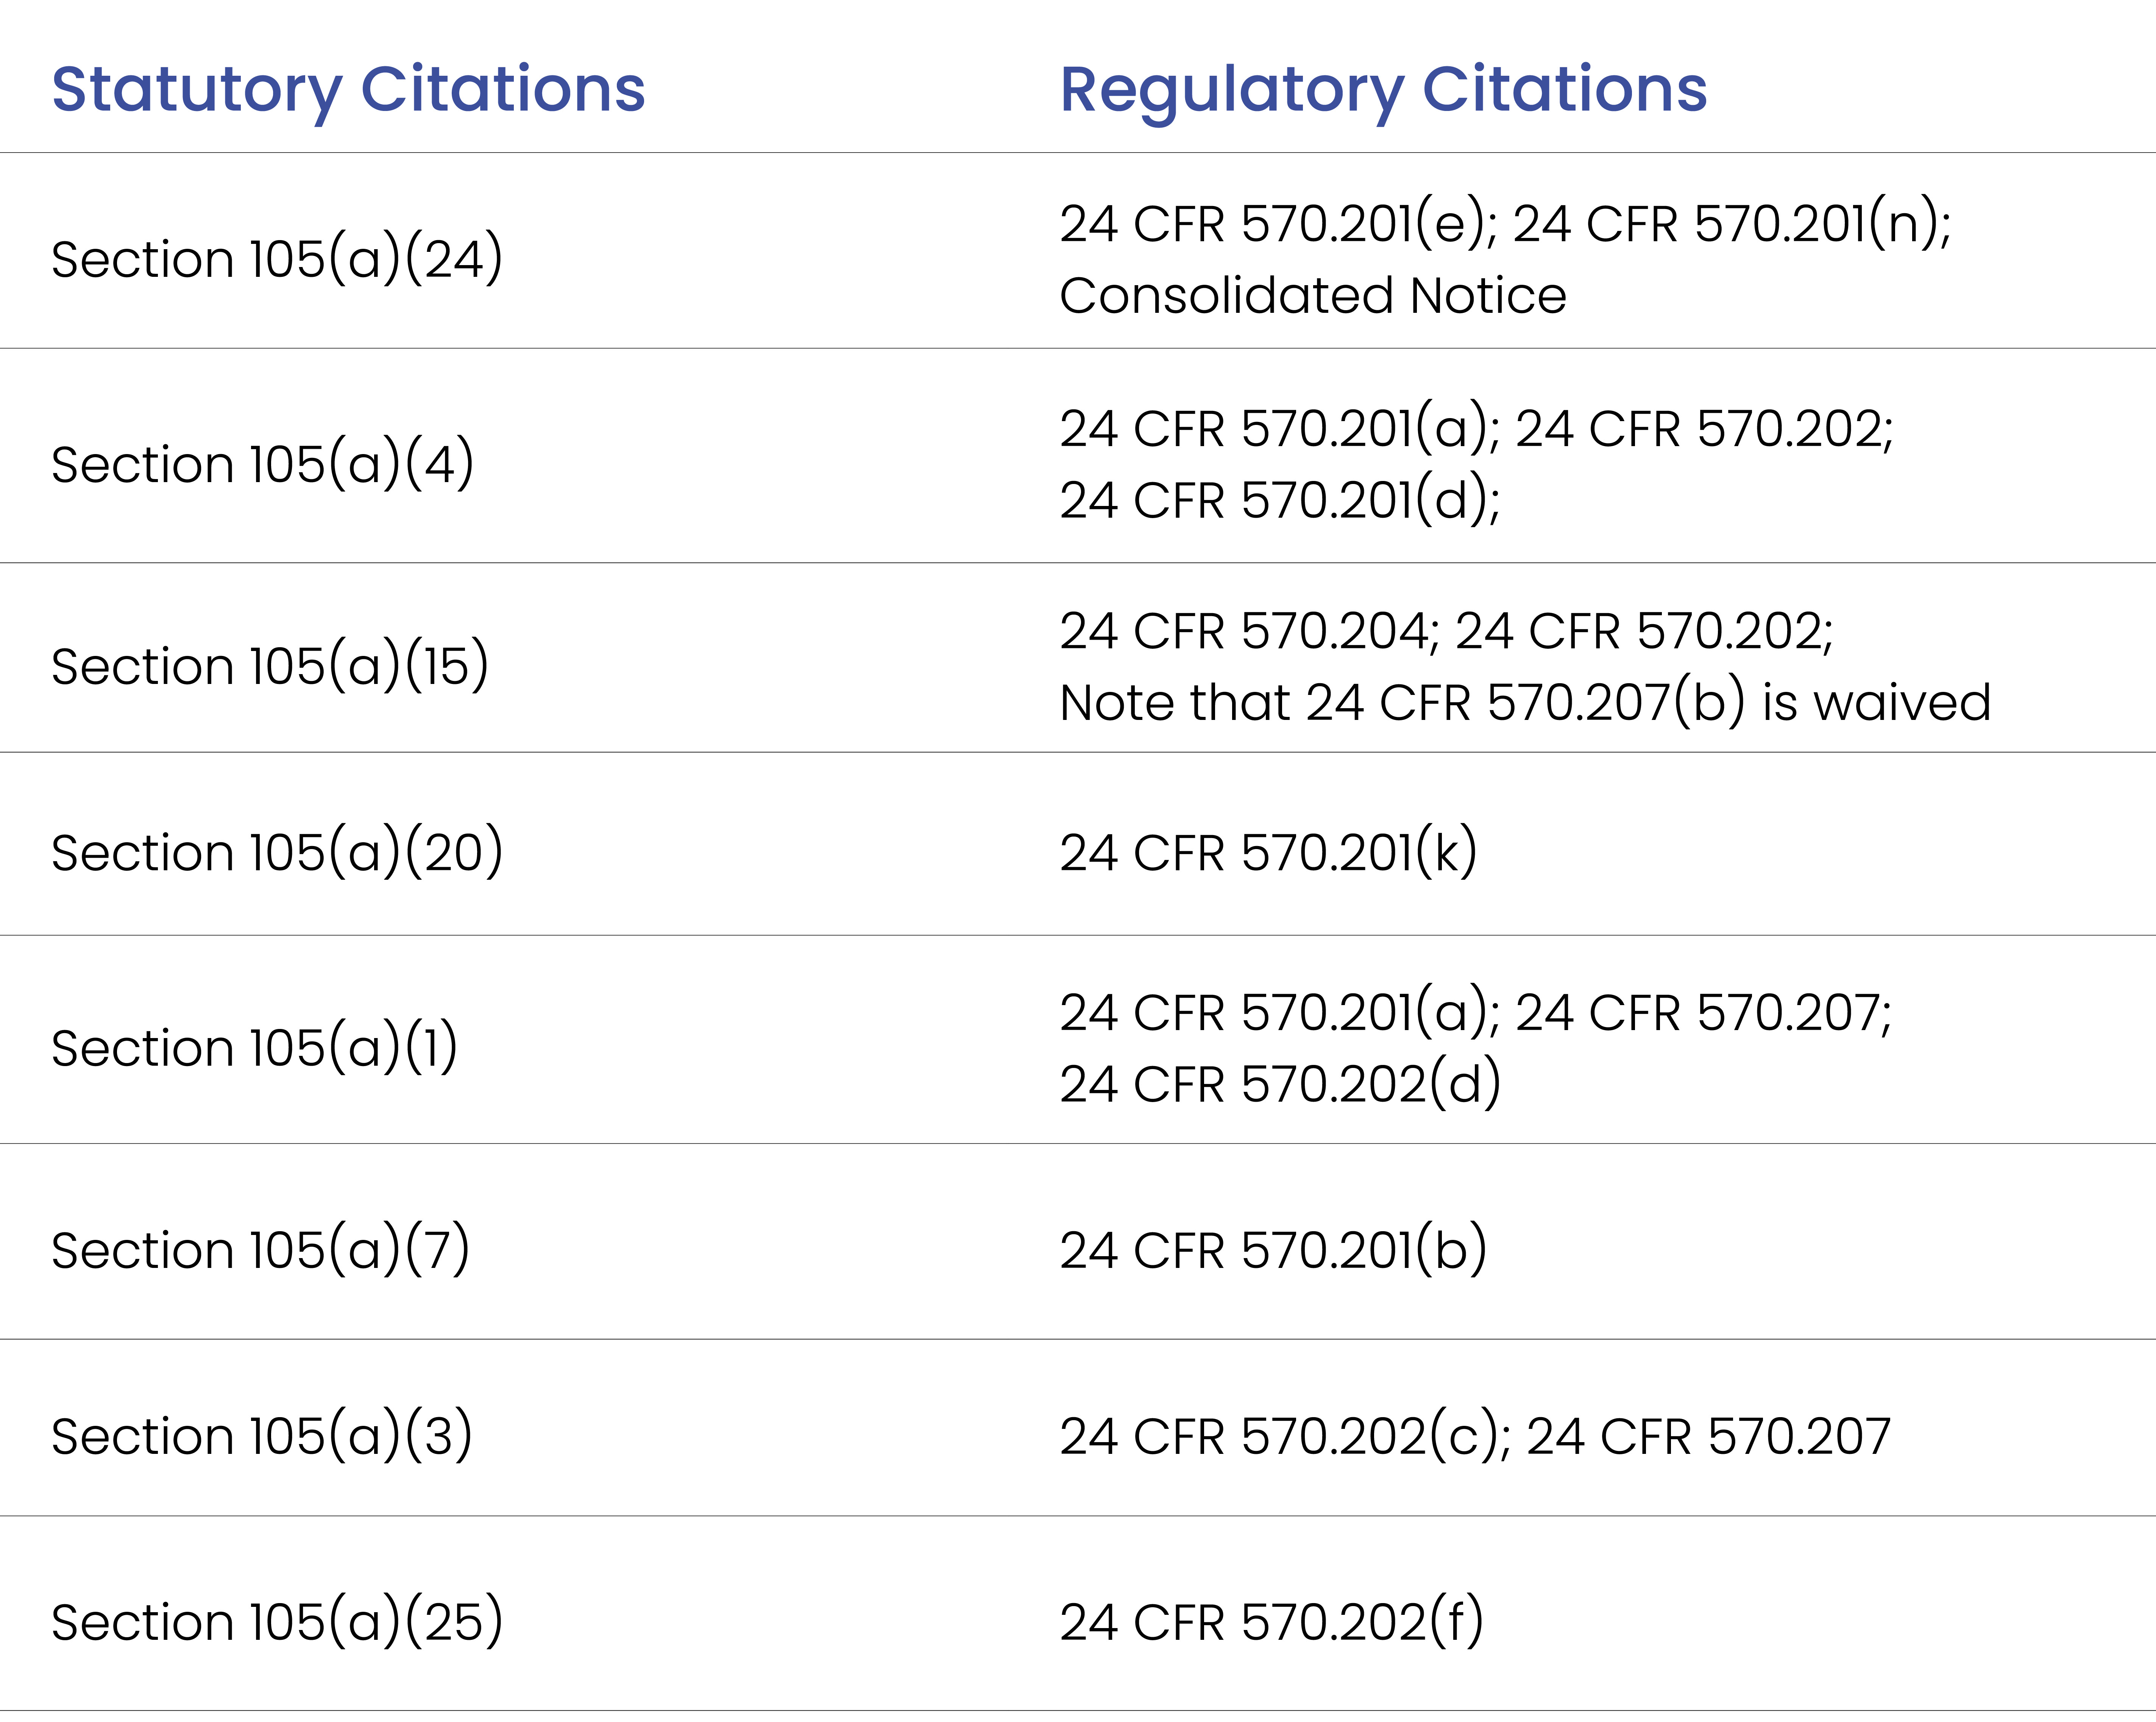 Table listing the statutory citations and regulatory citations for housing and related floodplain issues. The table has two columns. The first column lists statutory citations, and the second column lists regulatory citations. When you click on the image, it will open a new window displaying accessibility text details.